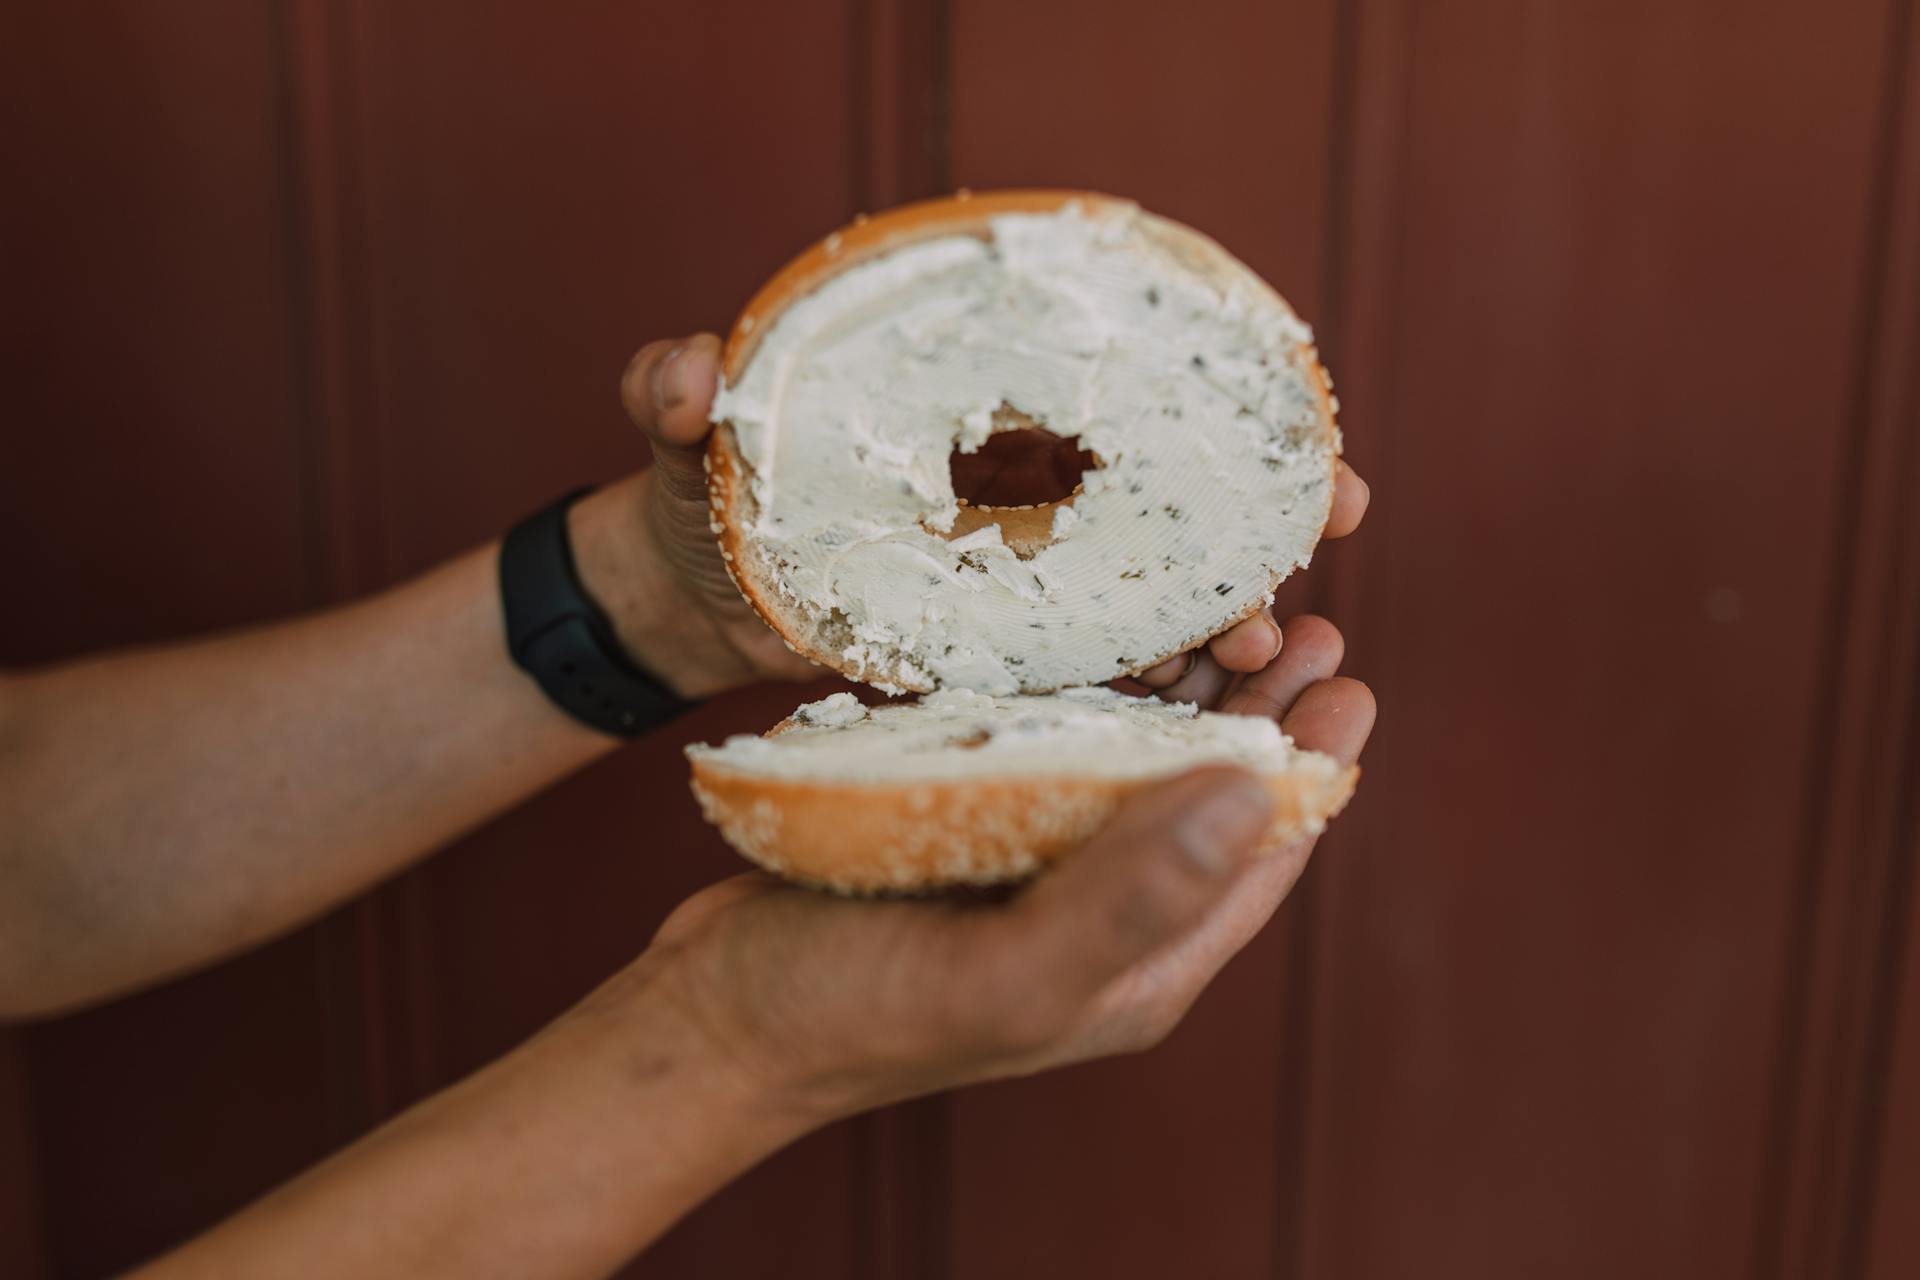 A woman holding a bagel with cream cheese | Source: Pexels